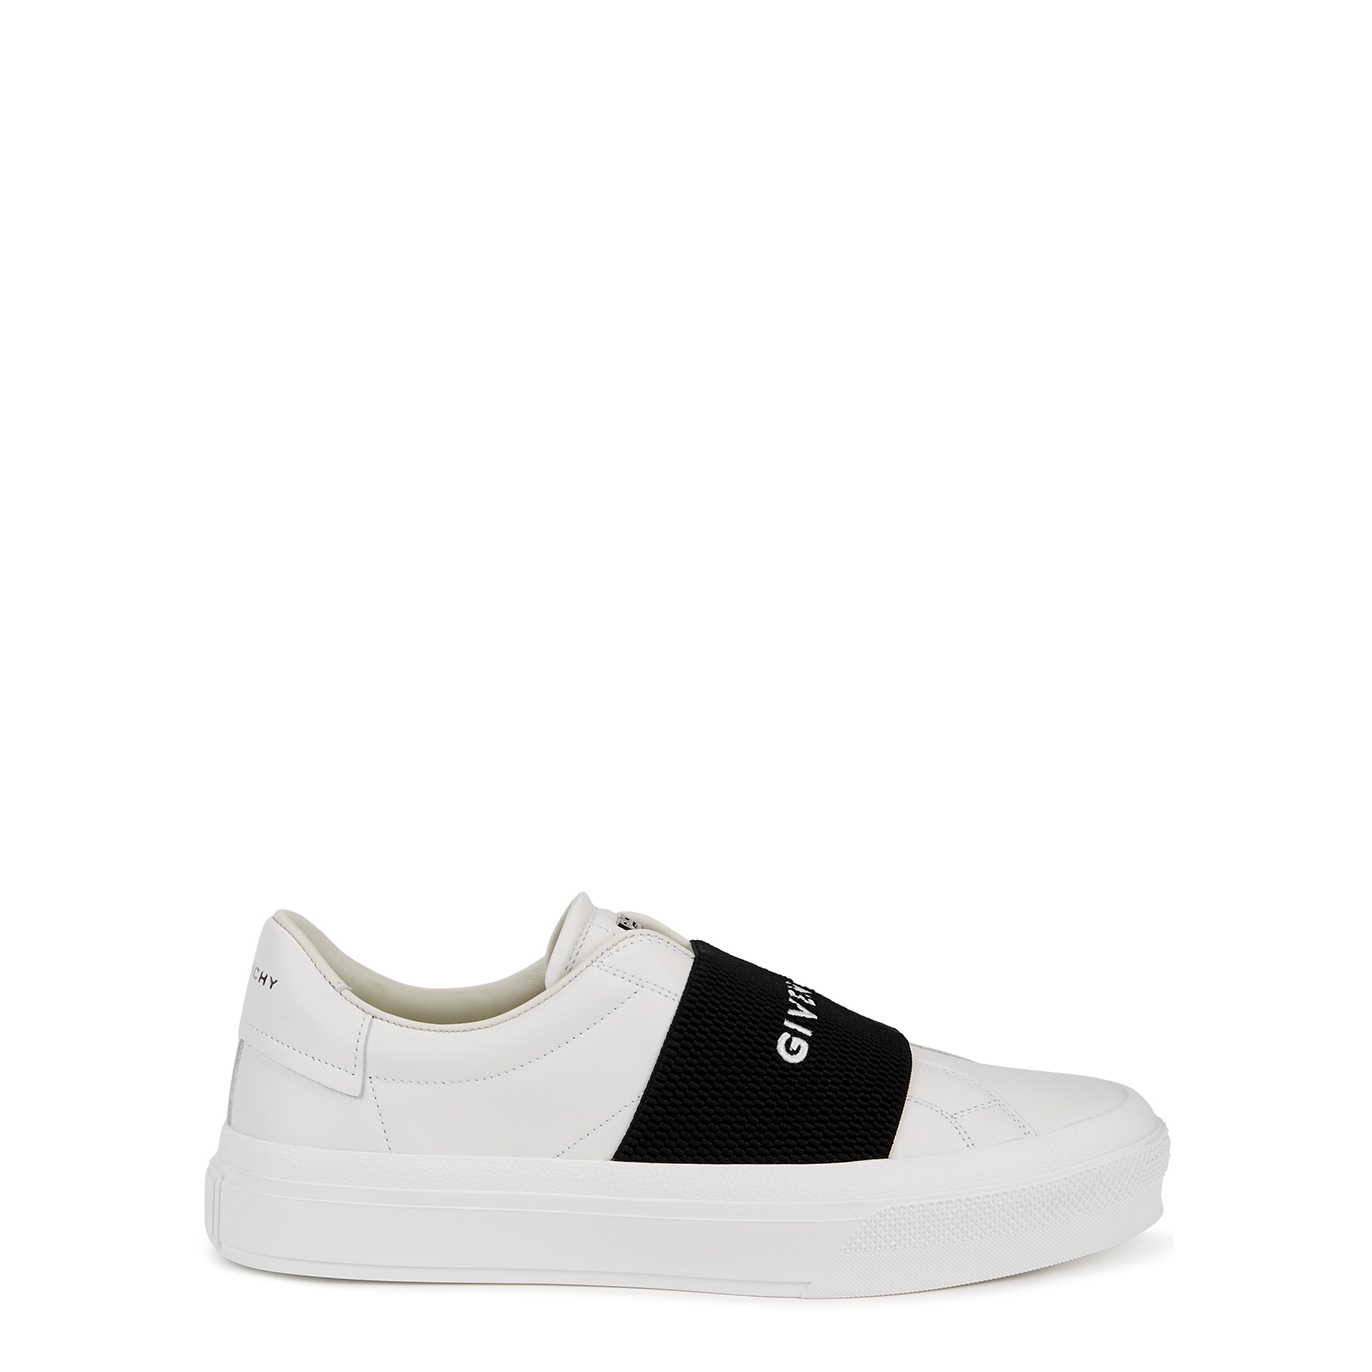 City Court White Leather Sneakers, Sneakers, White, Leather